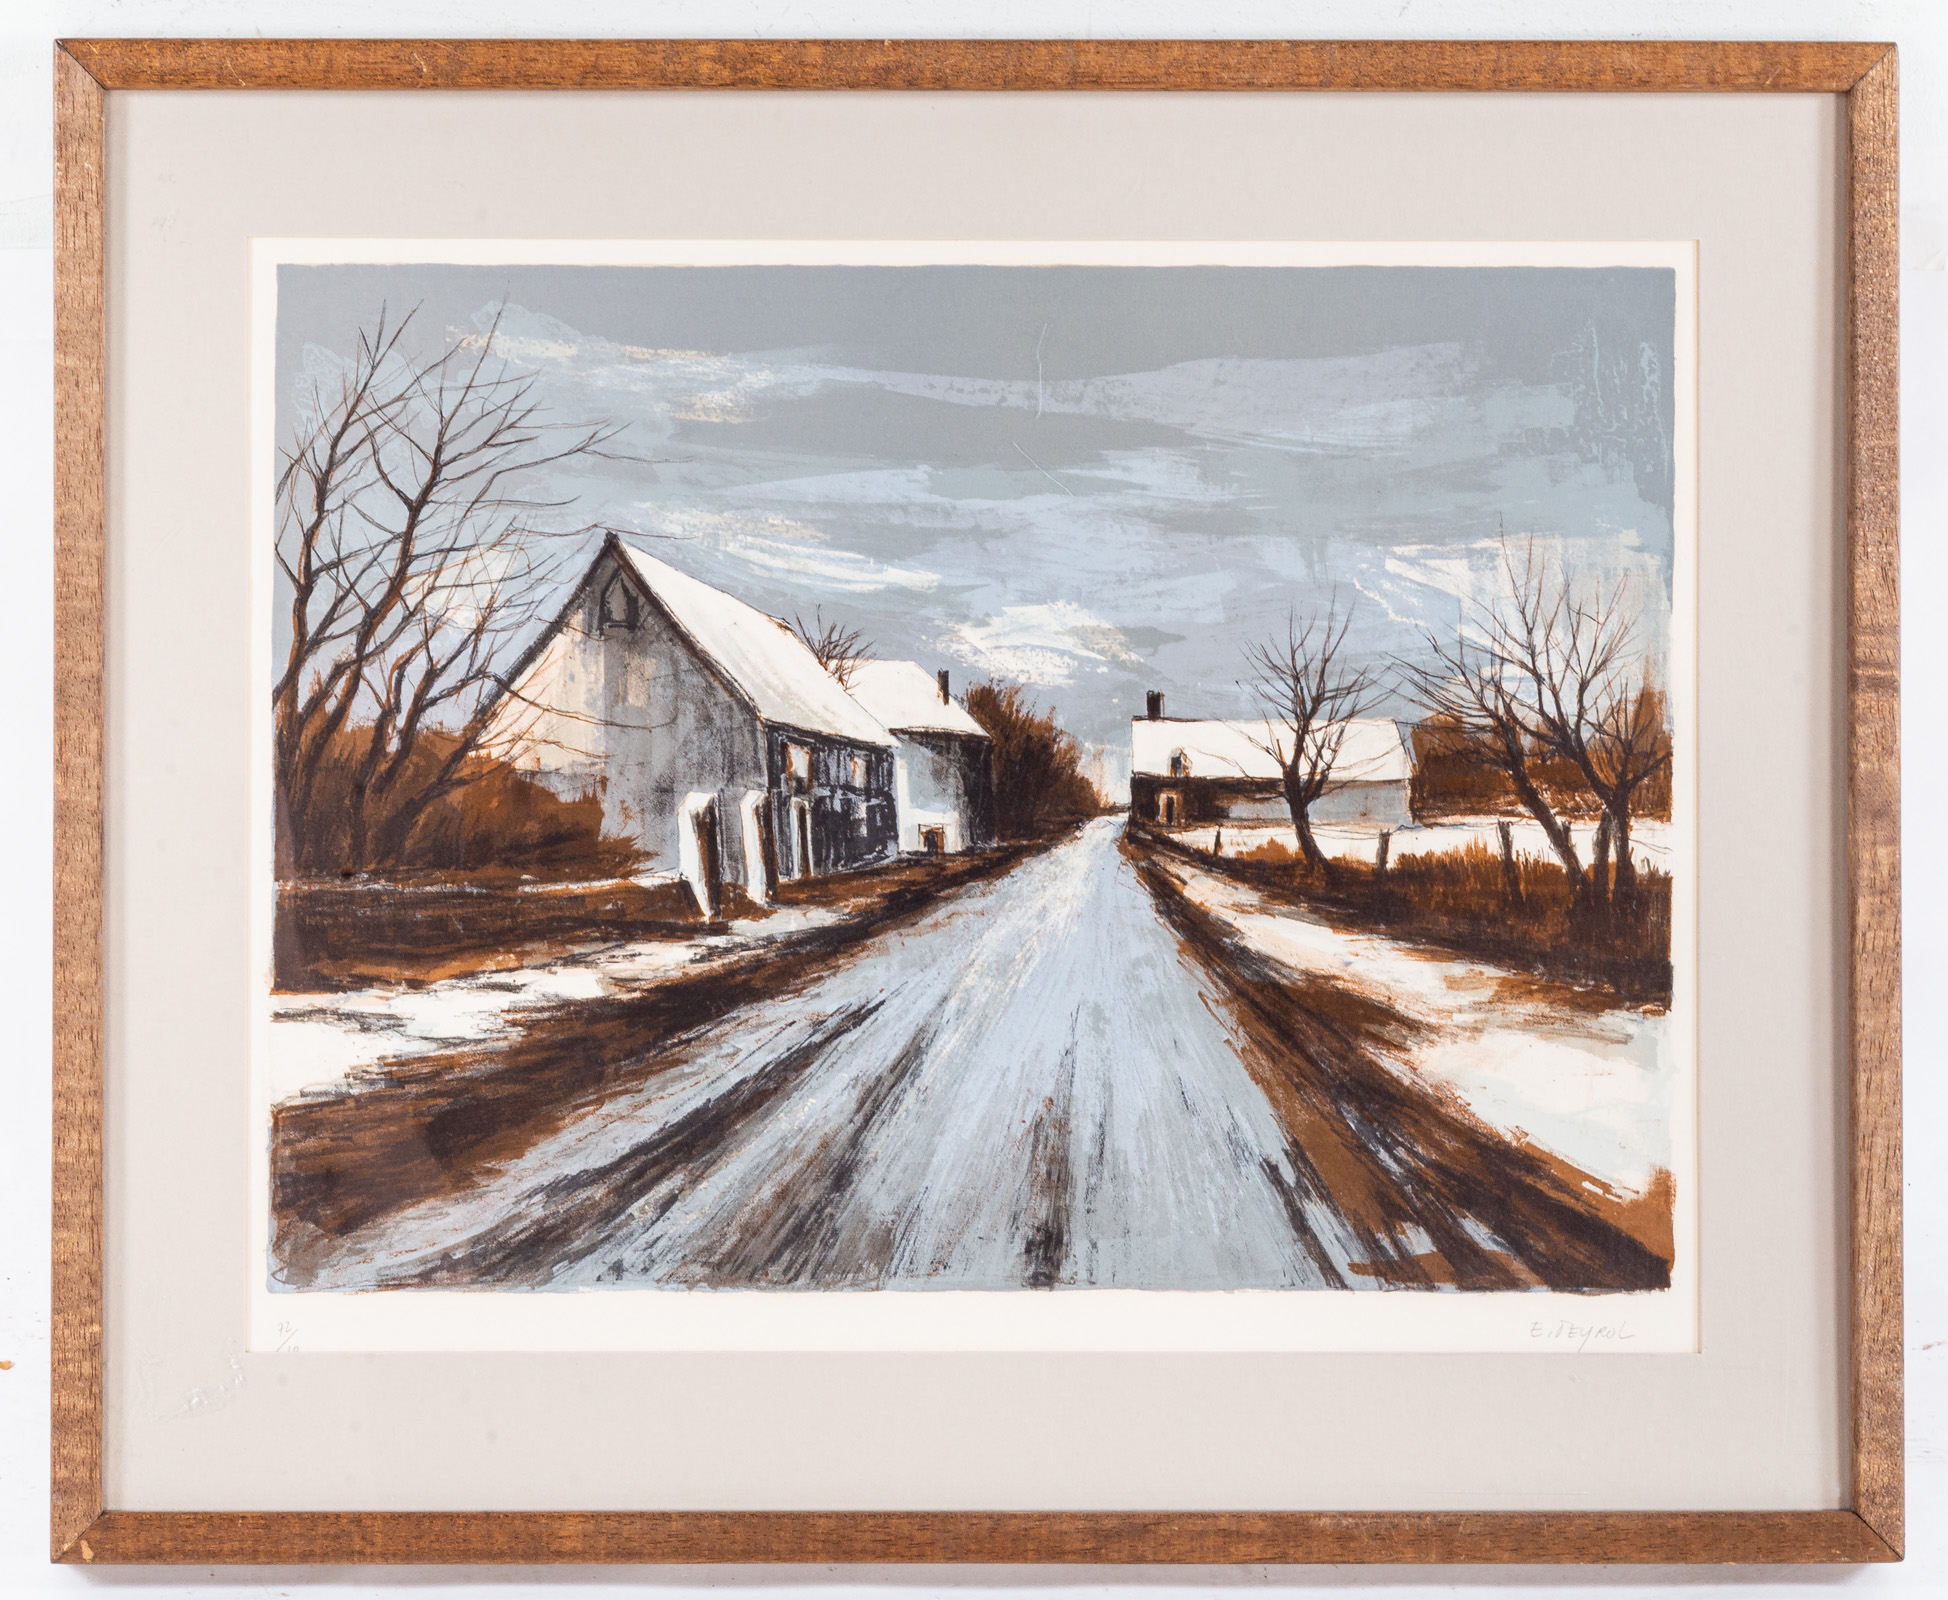 ERIC PEYROL. LONELY ROAD, LITHOGRAPH